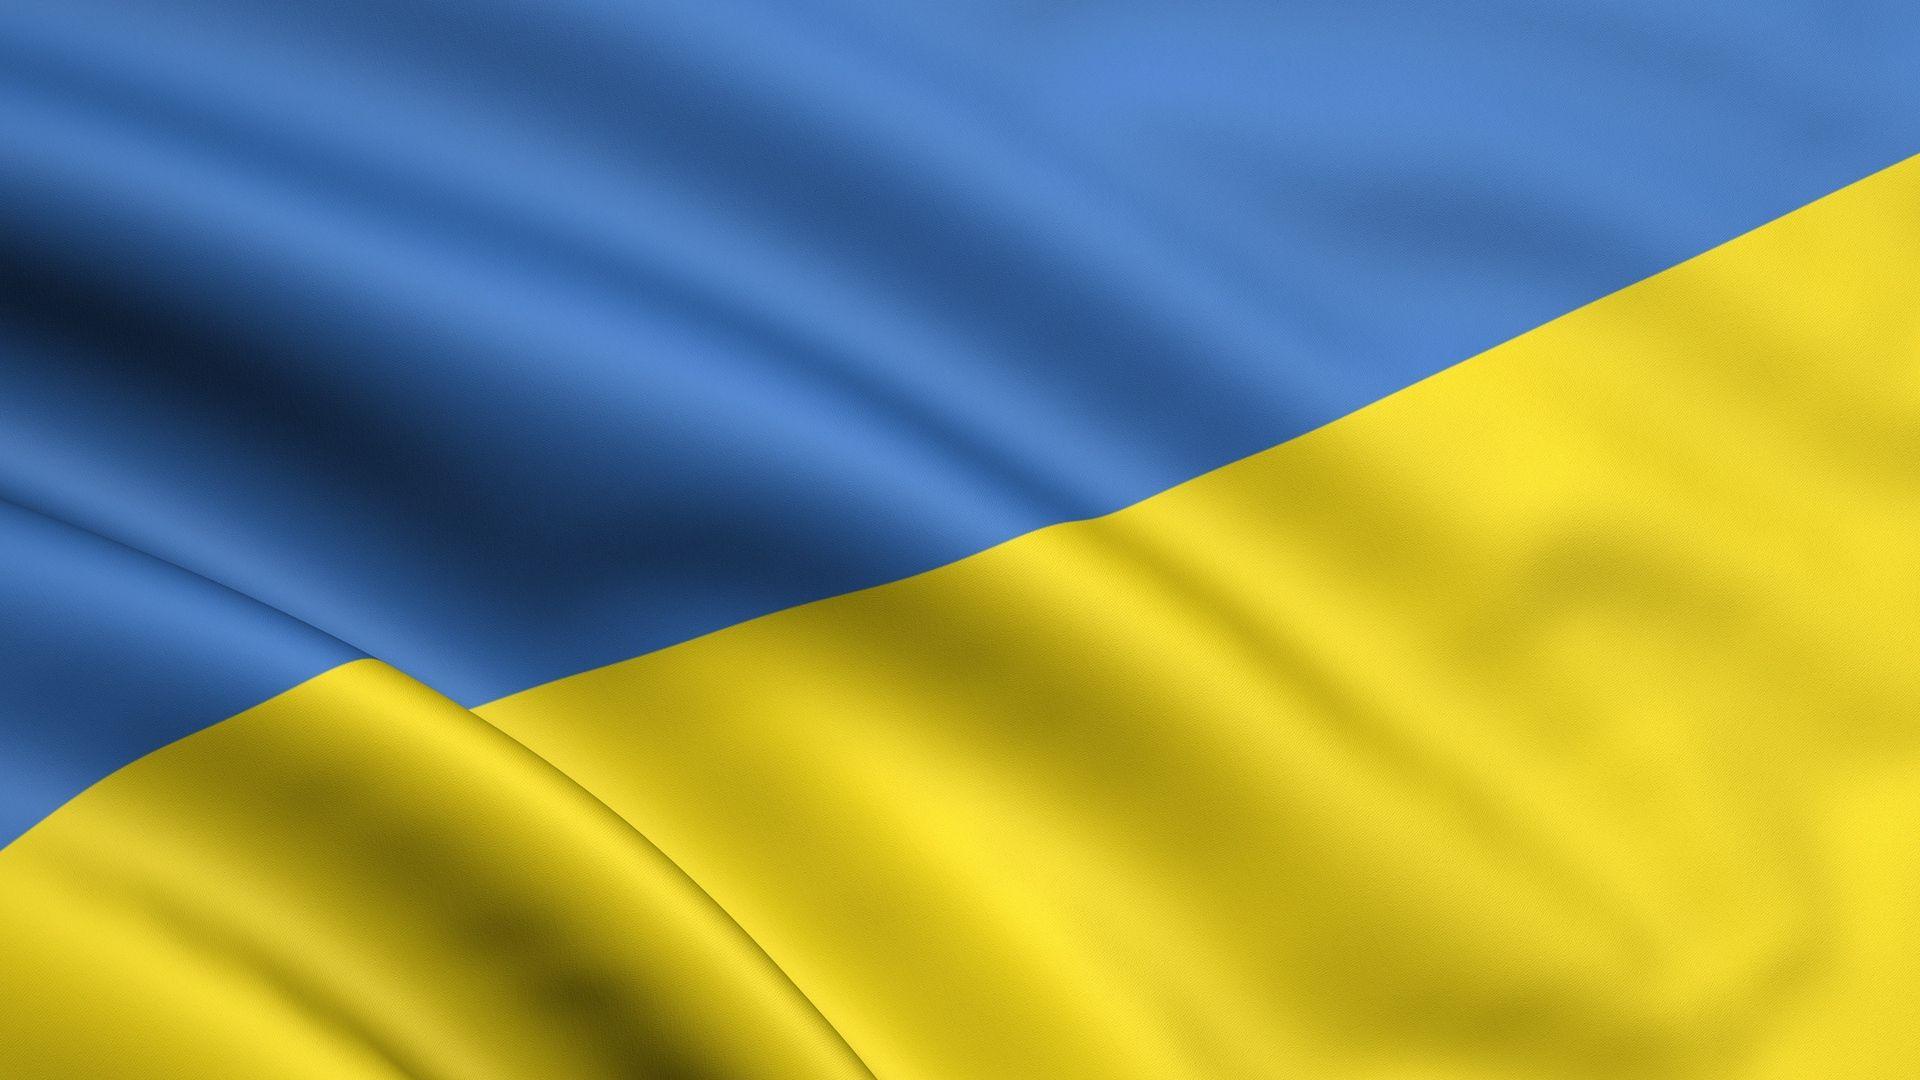 Download wallpapers yellow, blue, flag, ukraine full hd